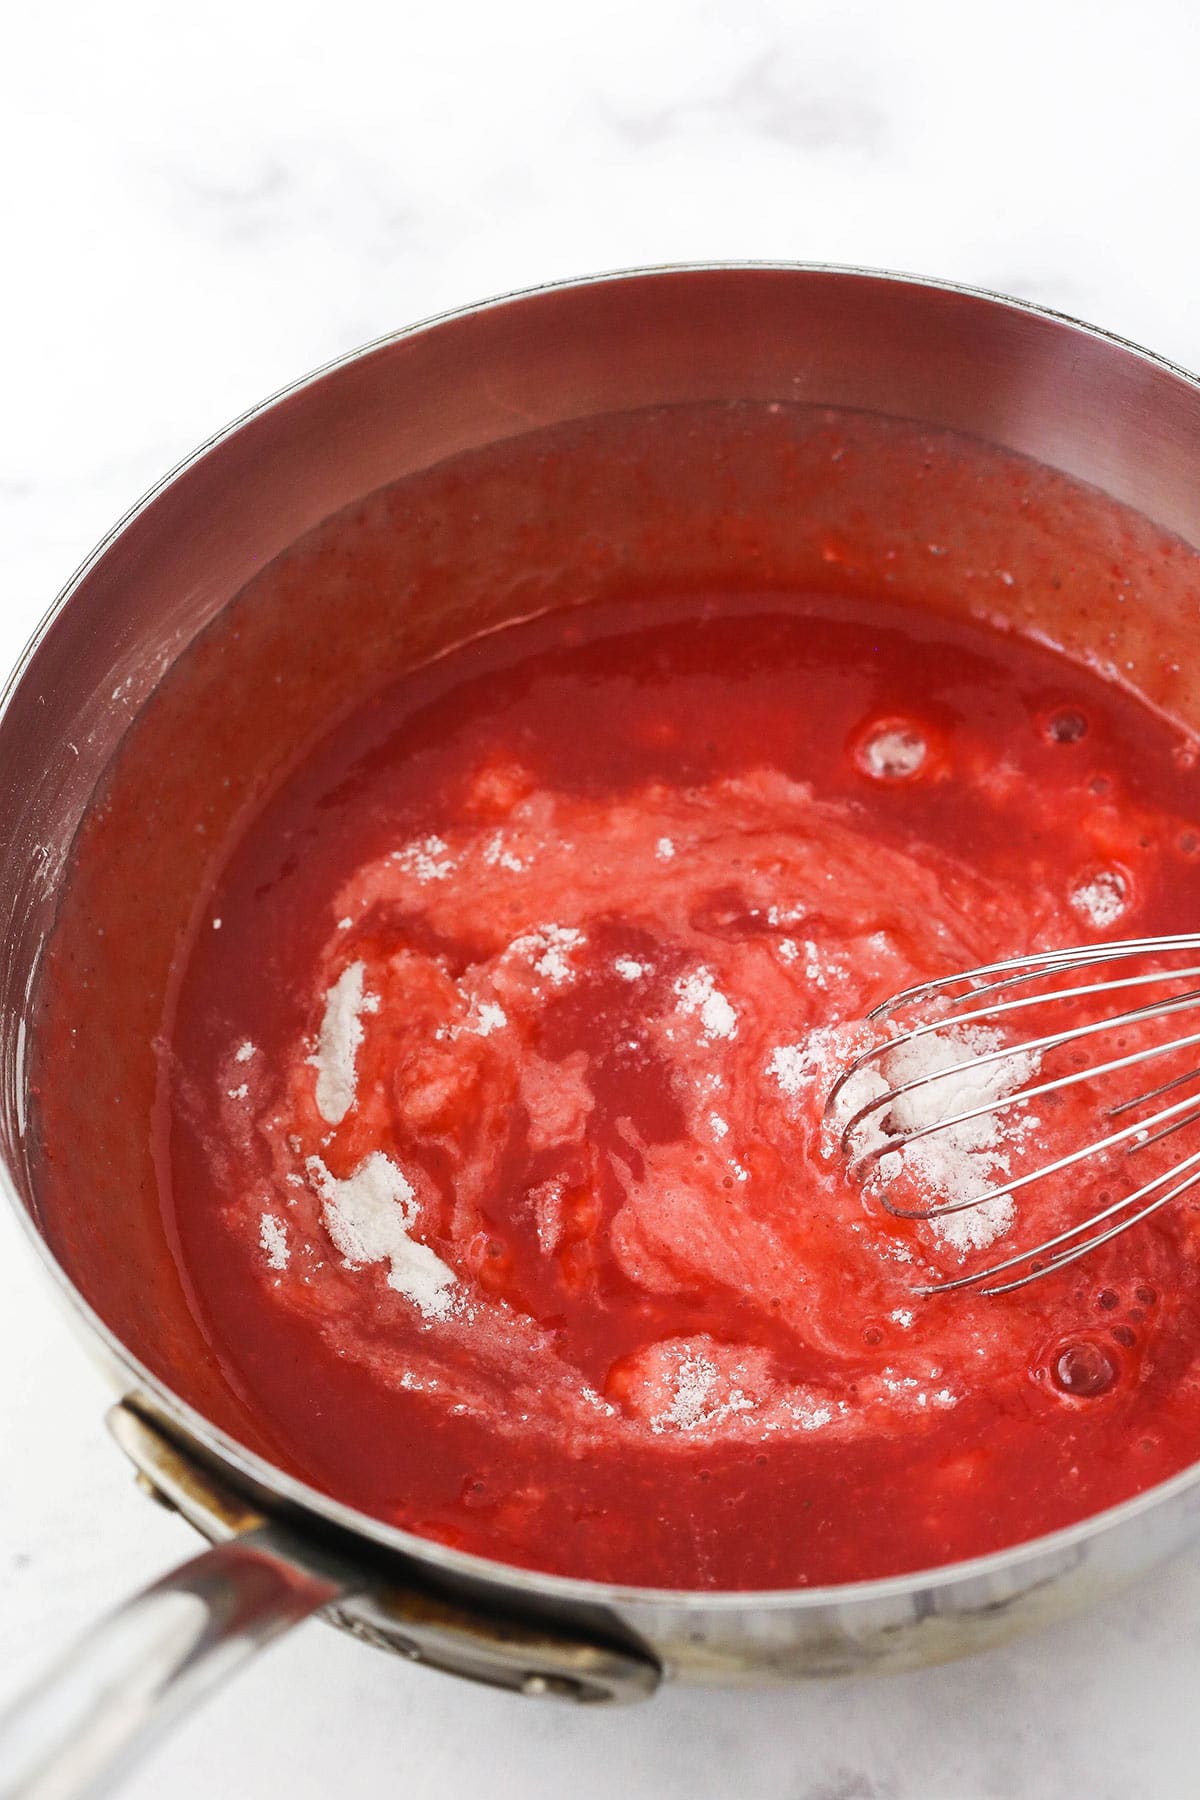 step 7 - cornstarch, sugar and strawberry puree being combined in saucepan